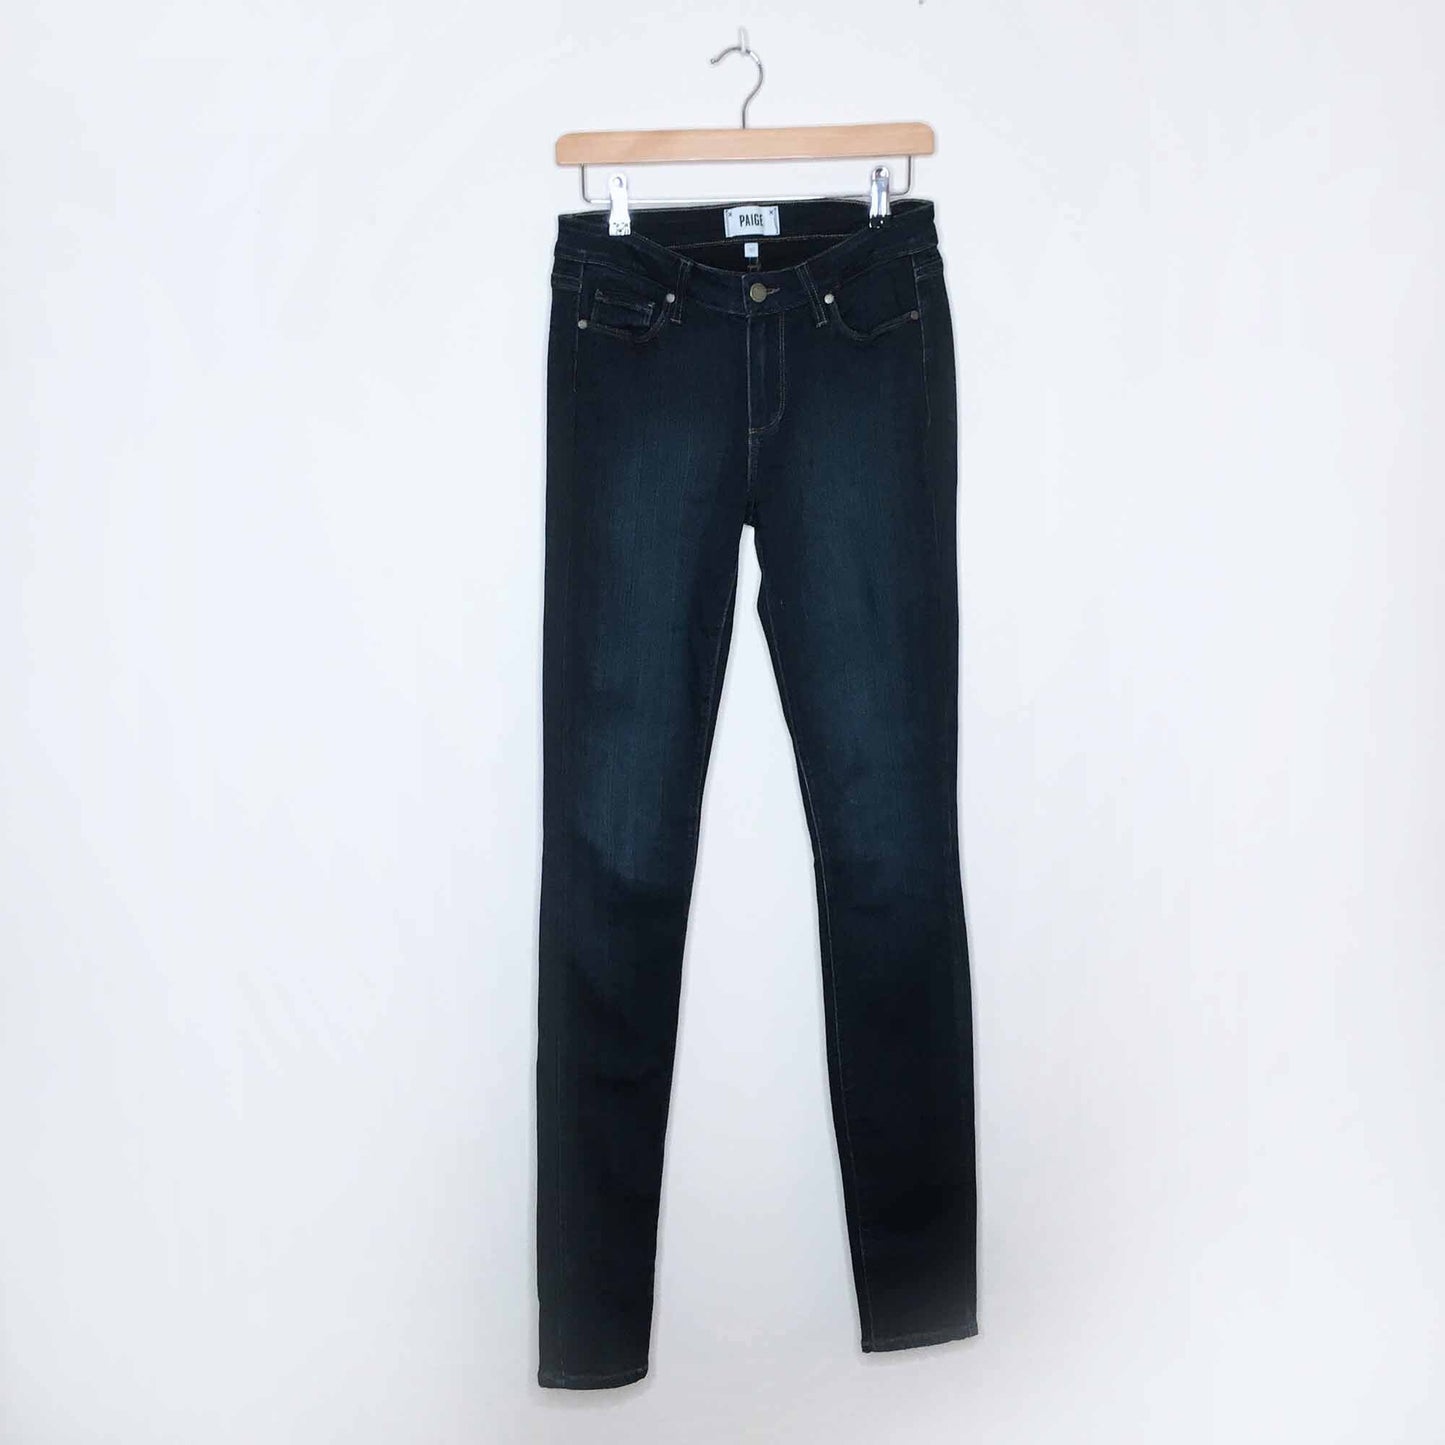 PAIGE mid-rise super skinny 35" length - size 30